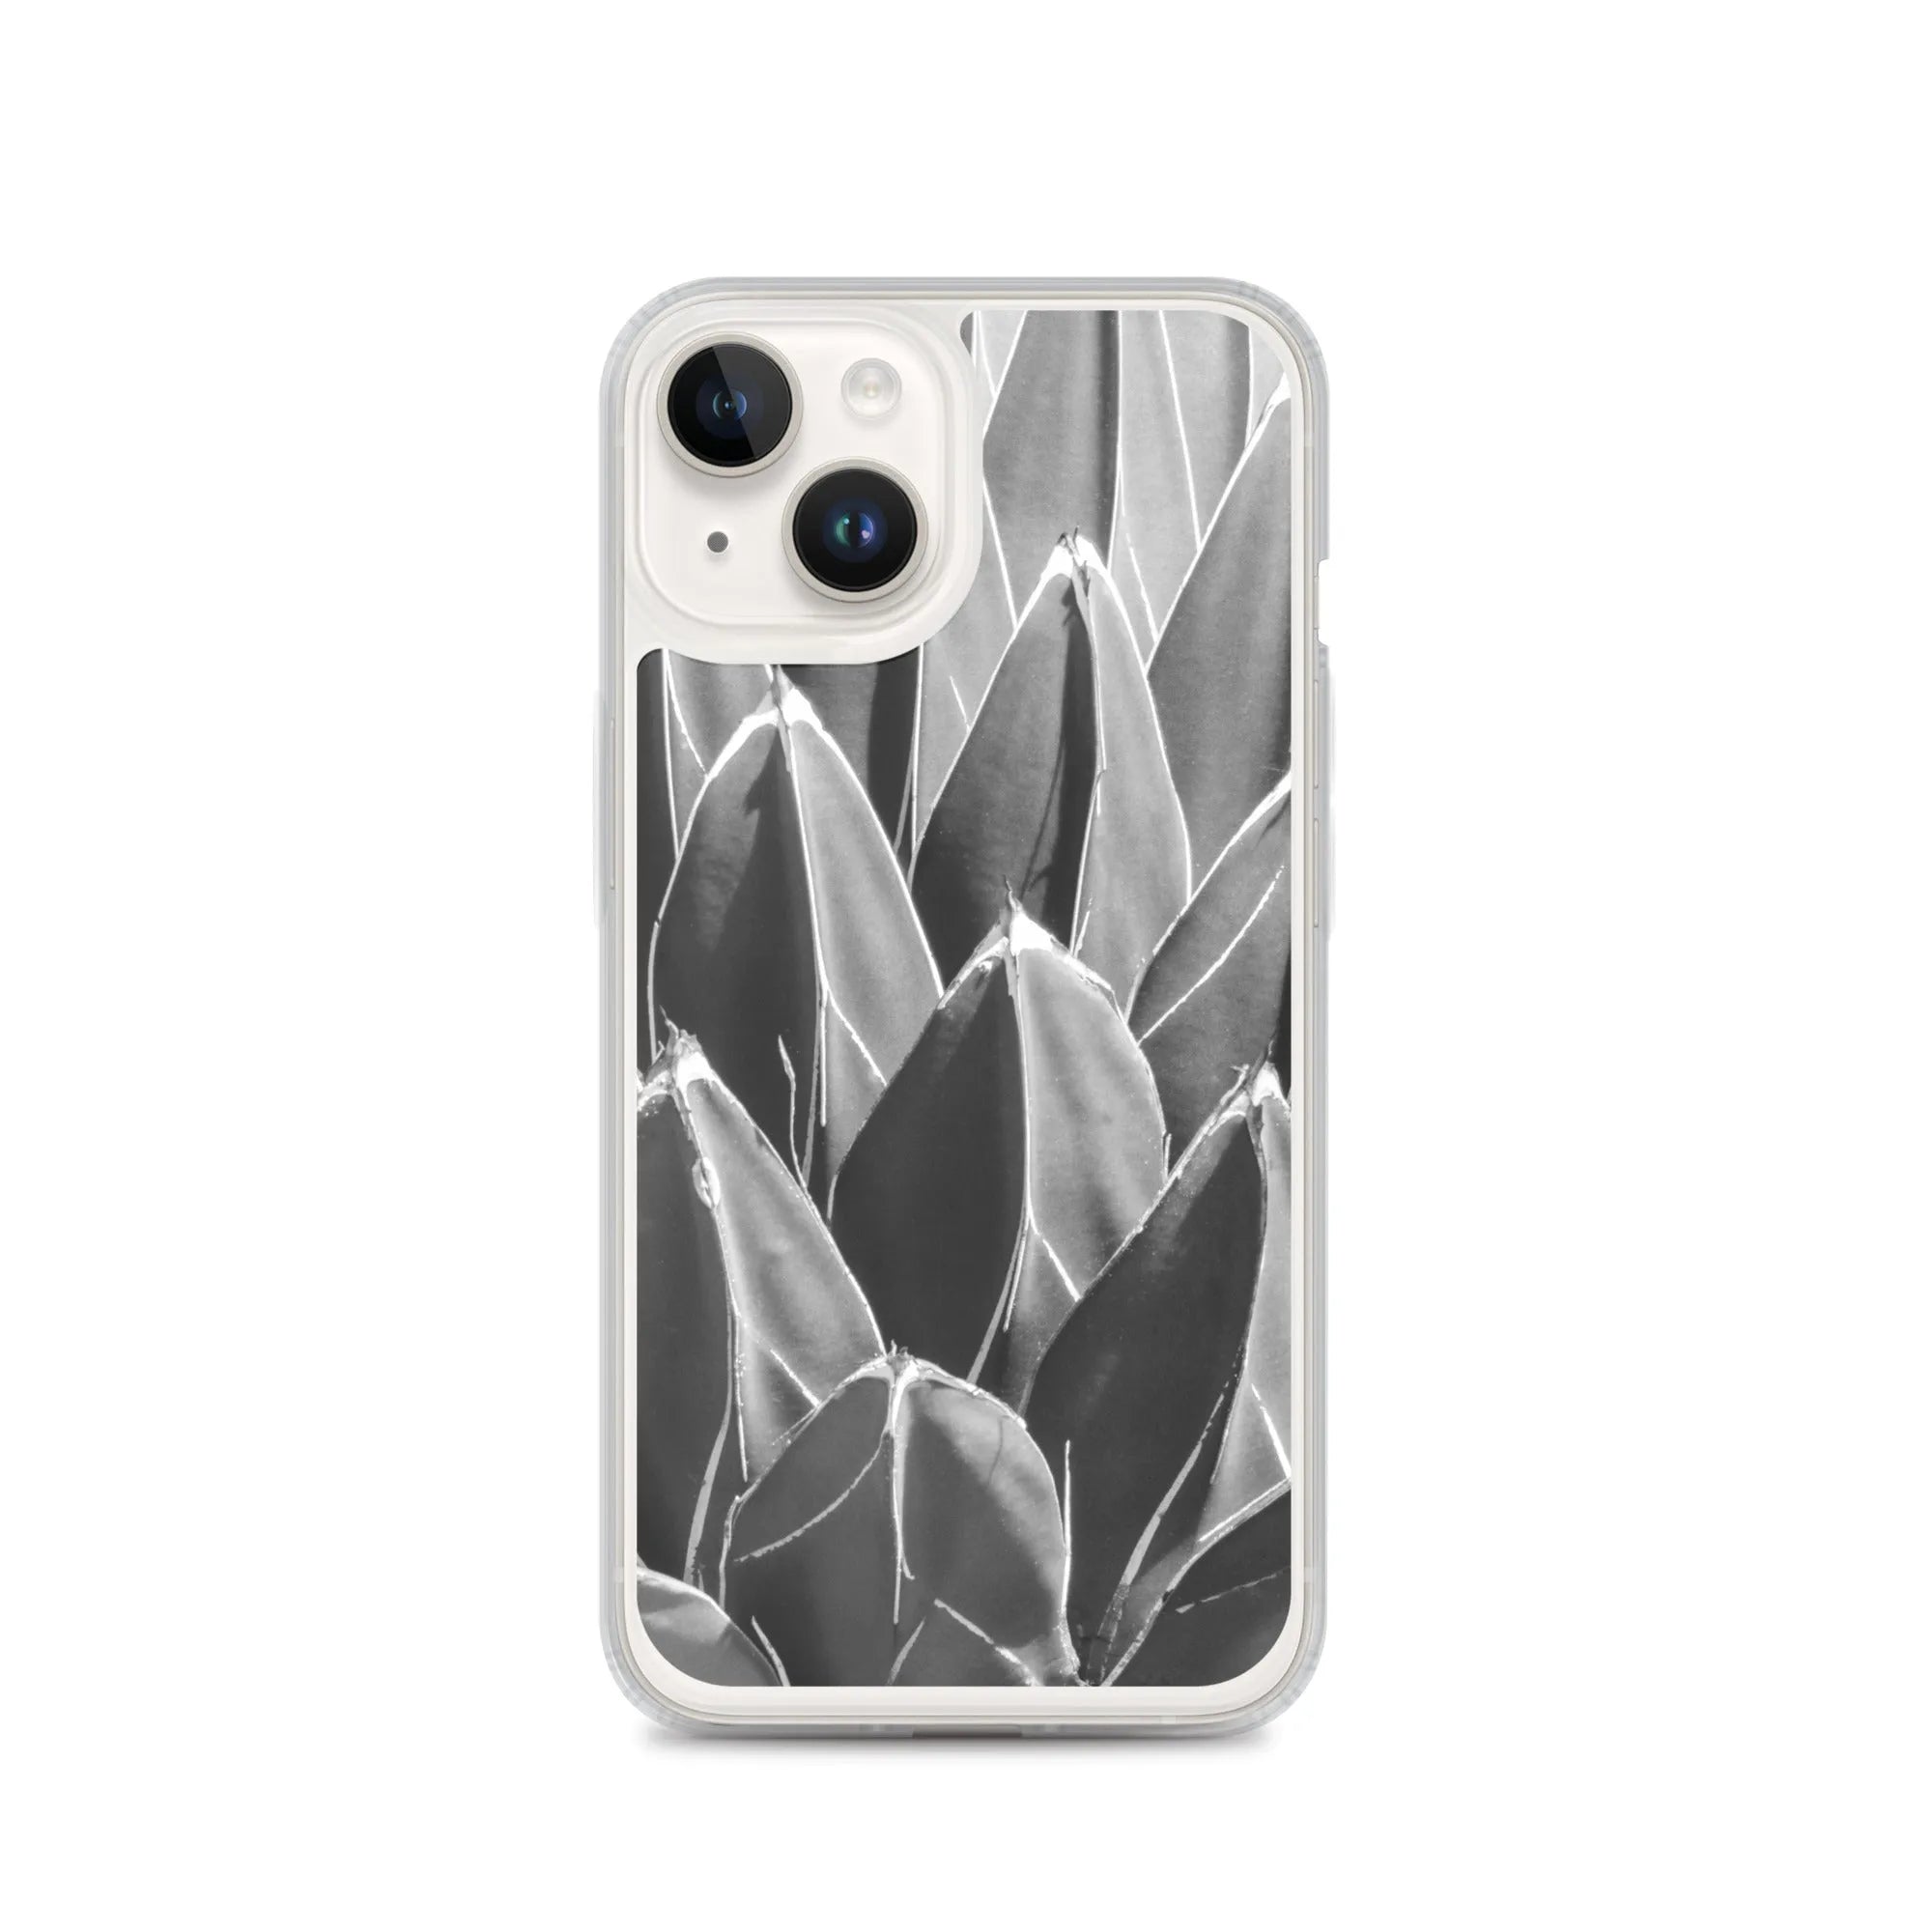 Decked Out Botanical Art Iphone Case - black And White - Iphone 14 - Mobile Phone Cases - Aesthetic Art